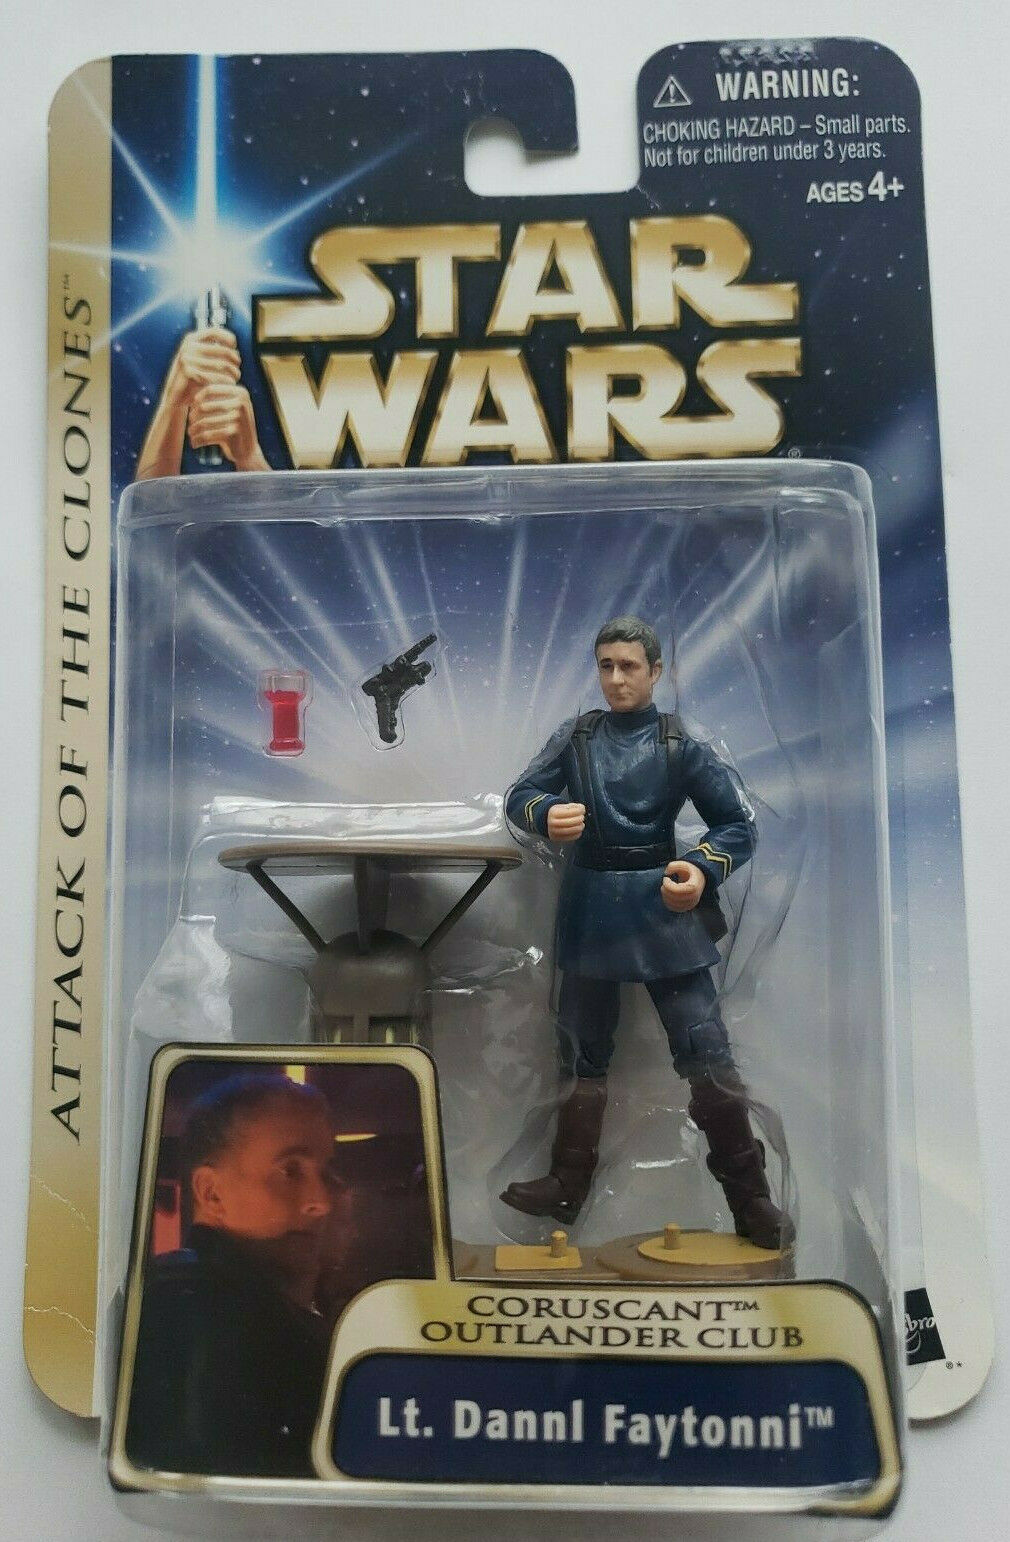 Primary image for Star Wars Attack of the Clones Lt.Dannl Faytonni Figure Coruscant Outlander Club